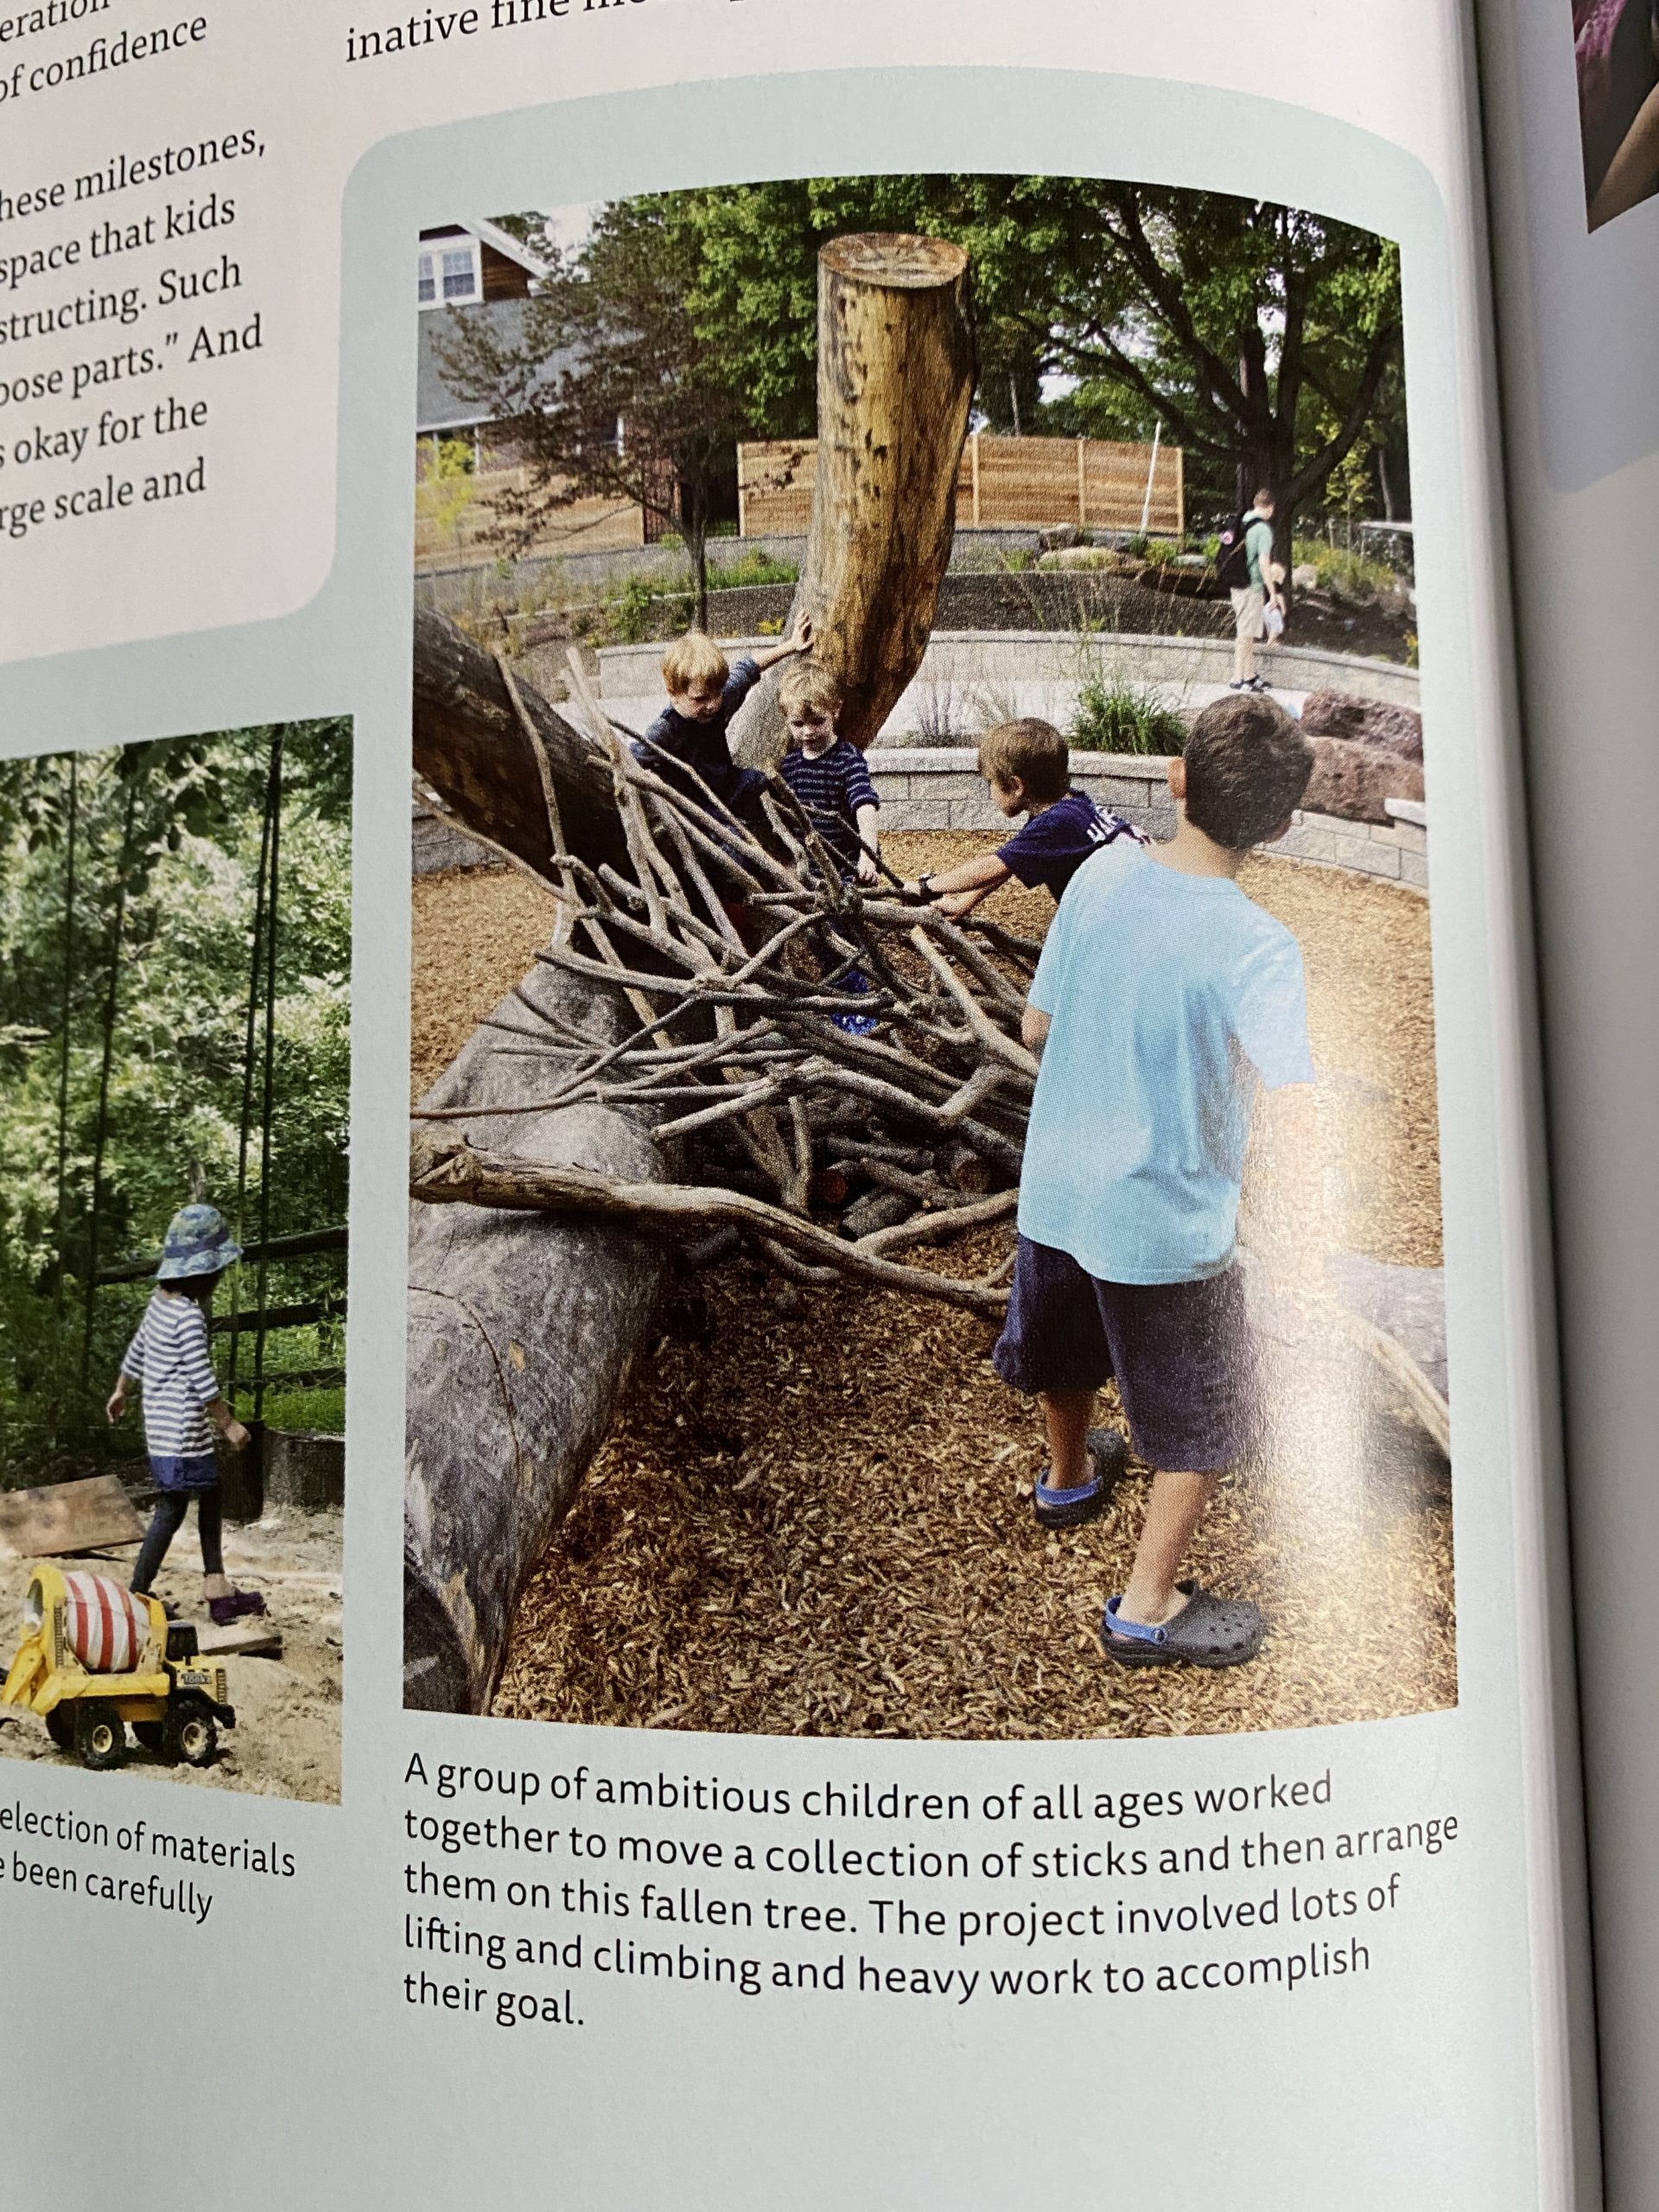 A group of ambitious children of all ages worked together to move a collection of sticks and then arrange them on this fallen tree. The project involved lots of lifting and climbing and heavy work to accomplish their goal